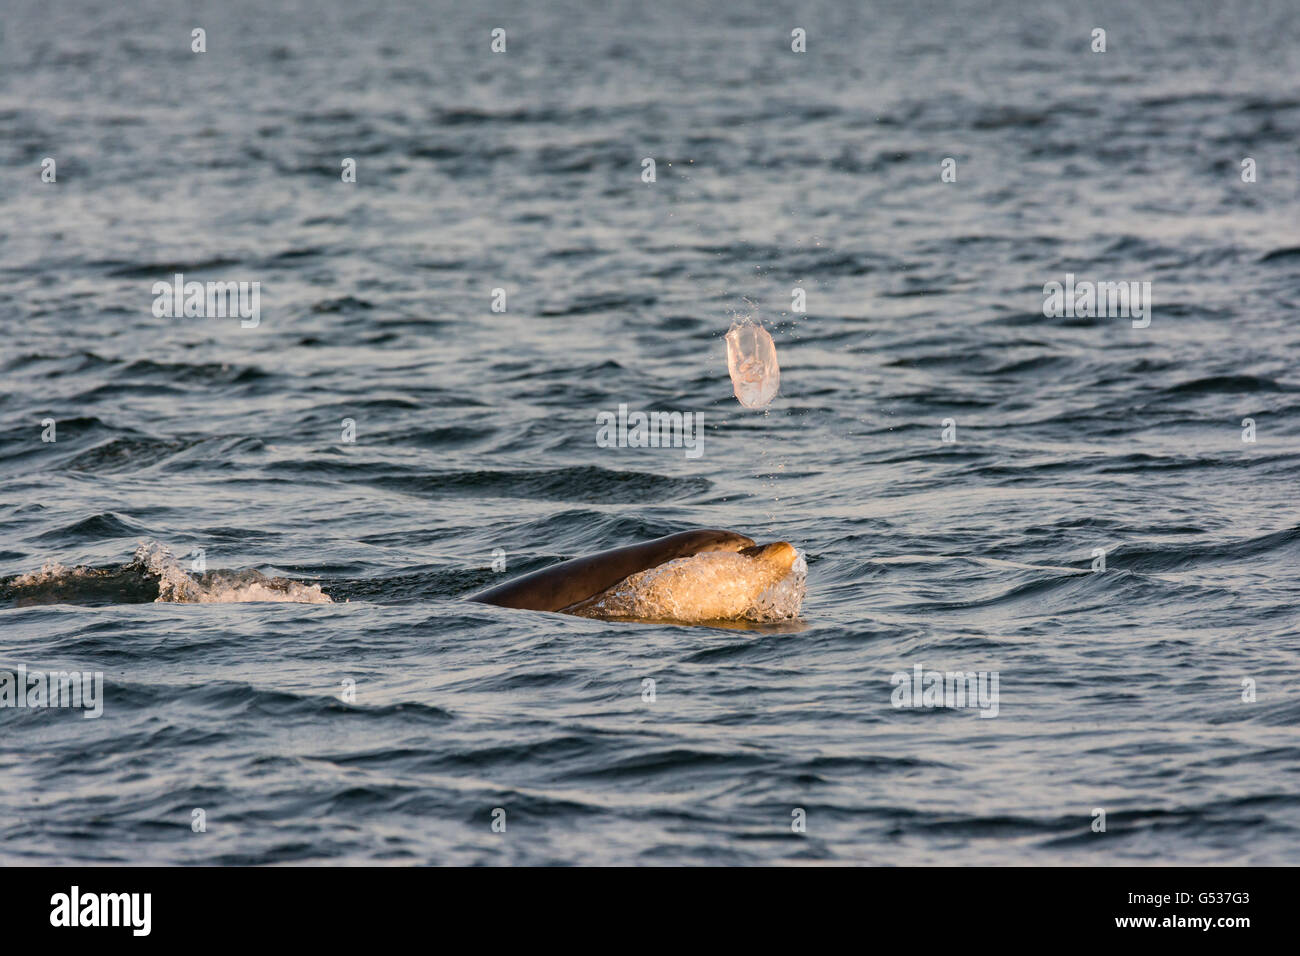 United Kingdom, Scotland, Highland, Fortrose, Chanonry Point, Black Isle, Tursiops swimming, Bottlenose Dolphins playing with a jellyfish Stock Photo